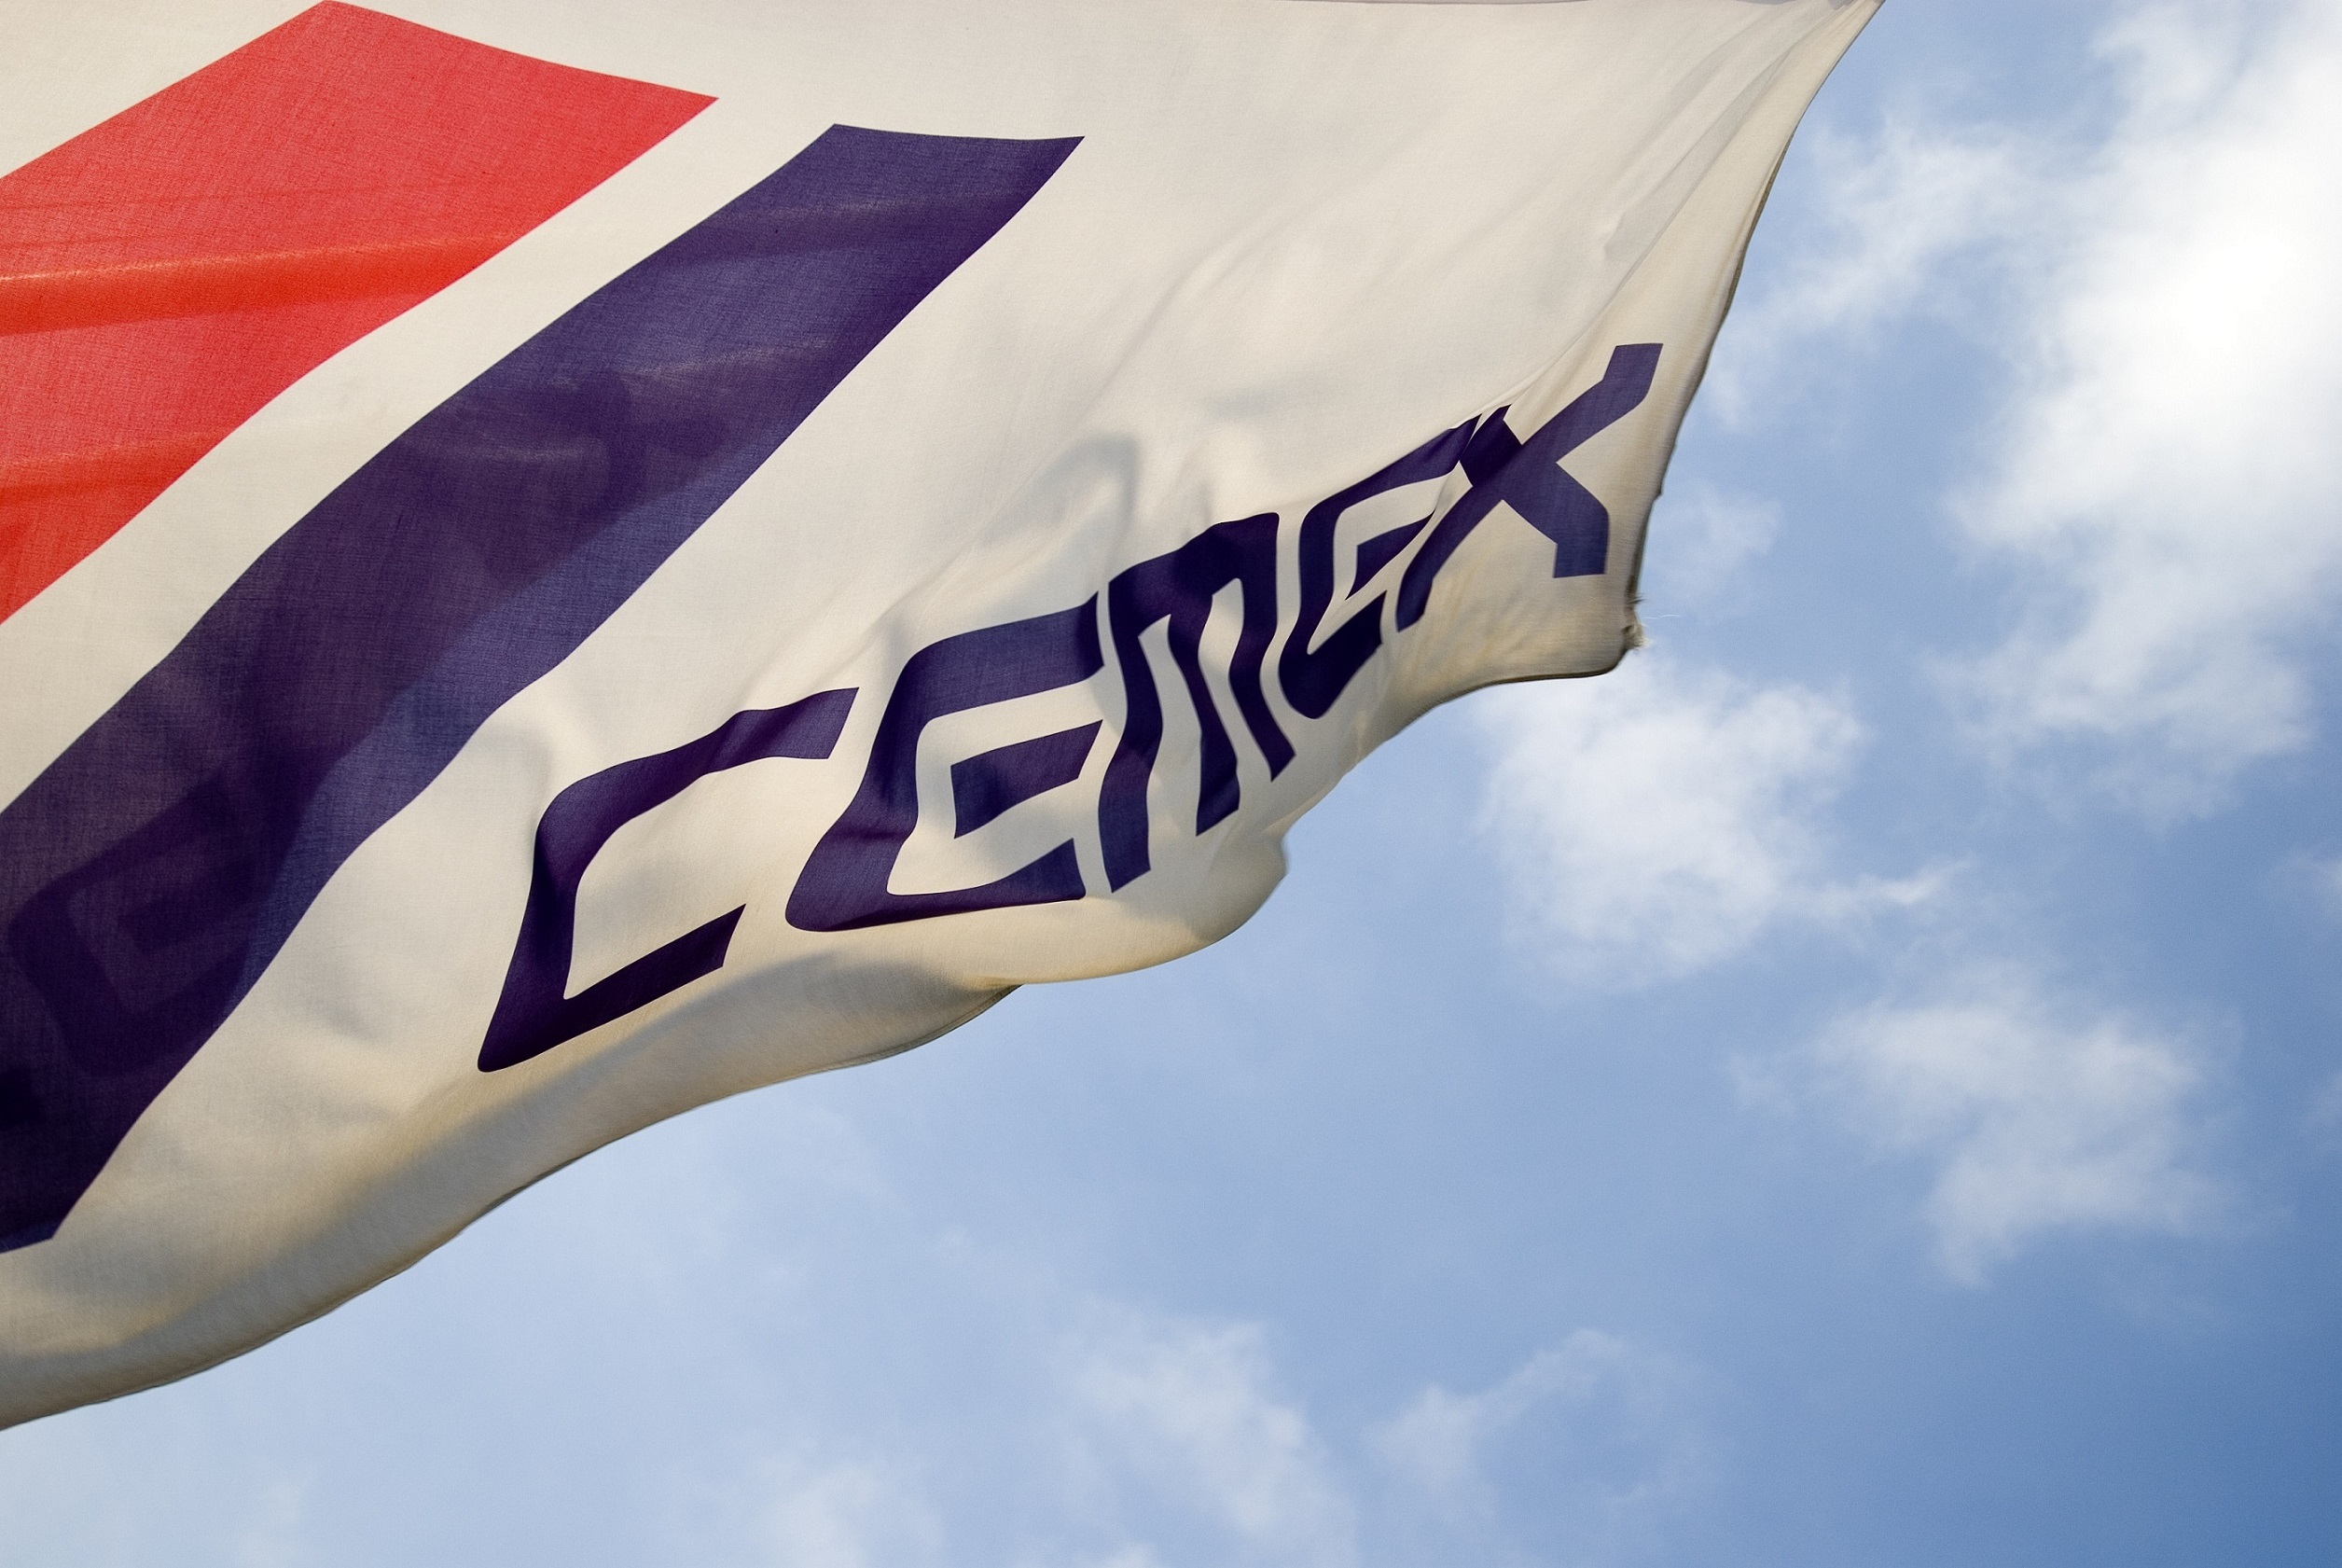  CEMEX says hydrogen is becoming an increasingly attractive element for industrial decarbonisation